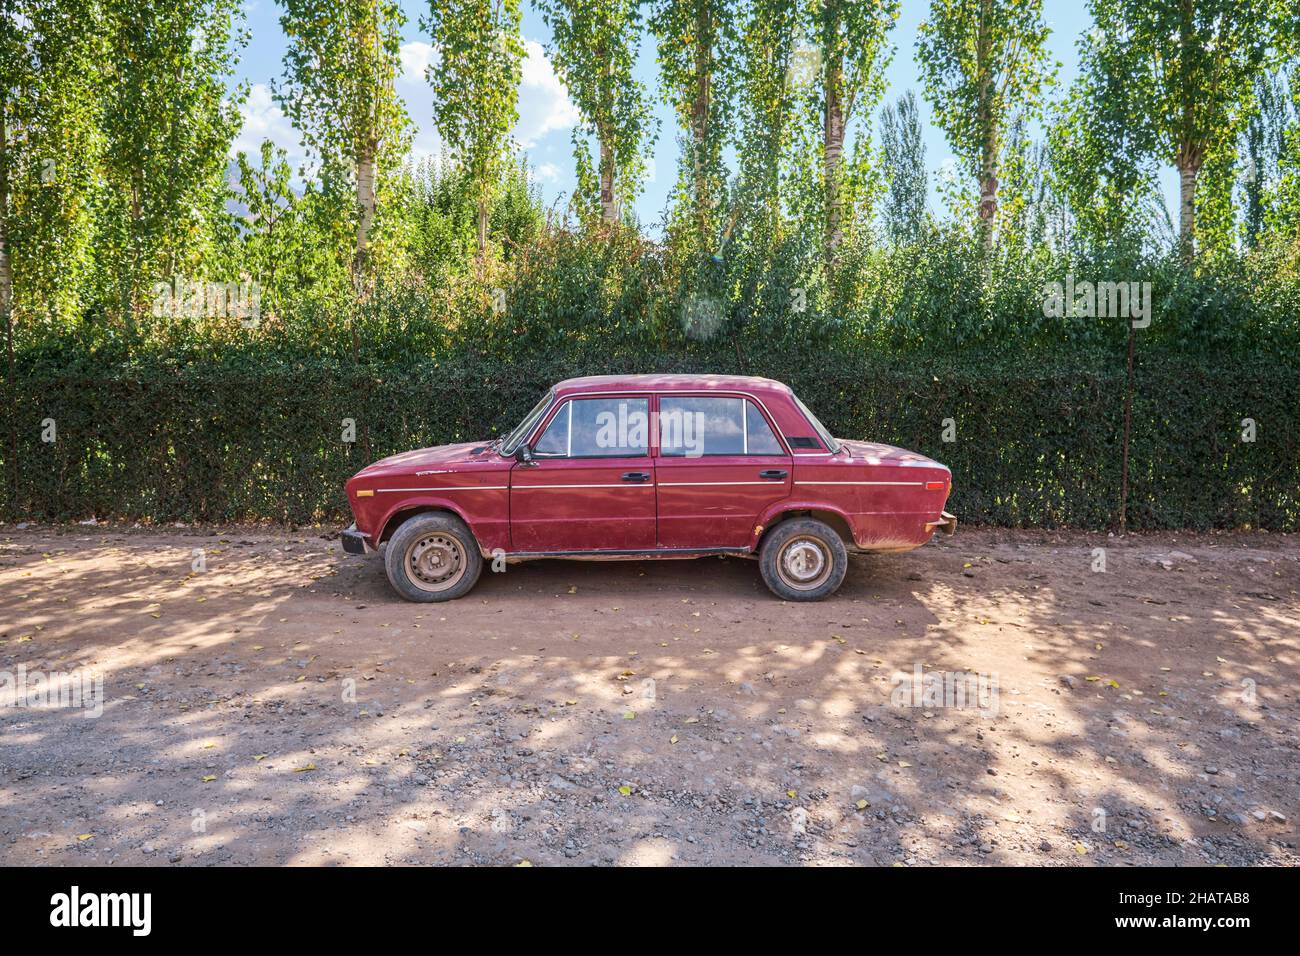 An old, Russian red Lada car parked on a dusty rural road in the country. In the Lake Charvak resevoir area near Tashkent, Uzbekistan. Stock Photo